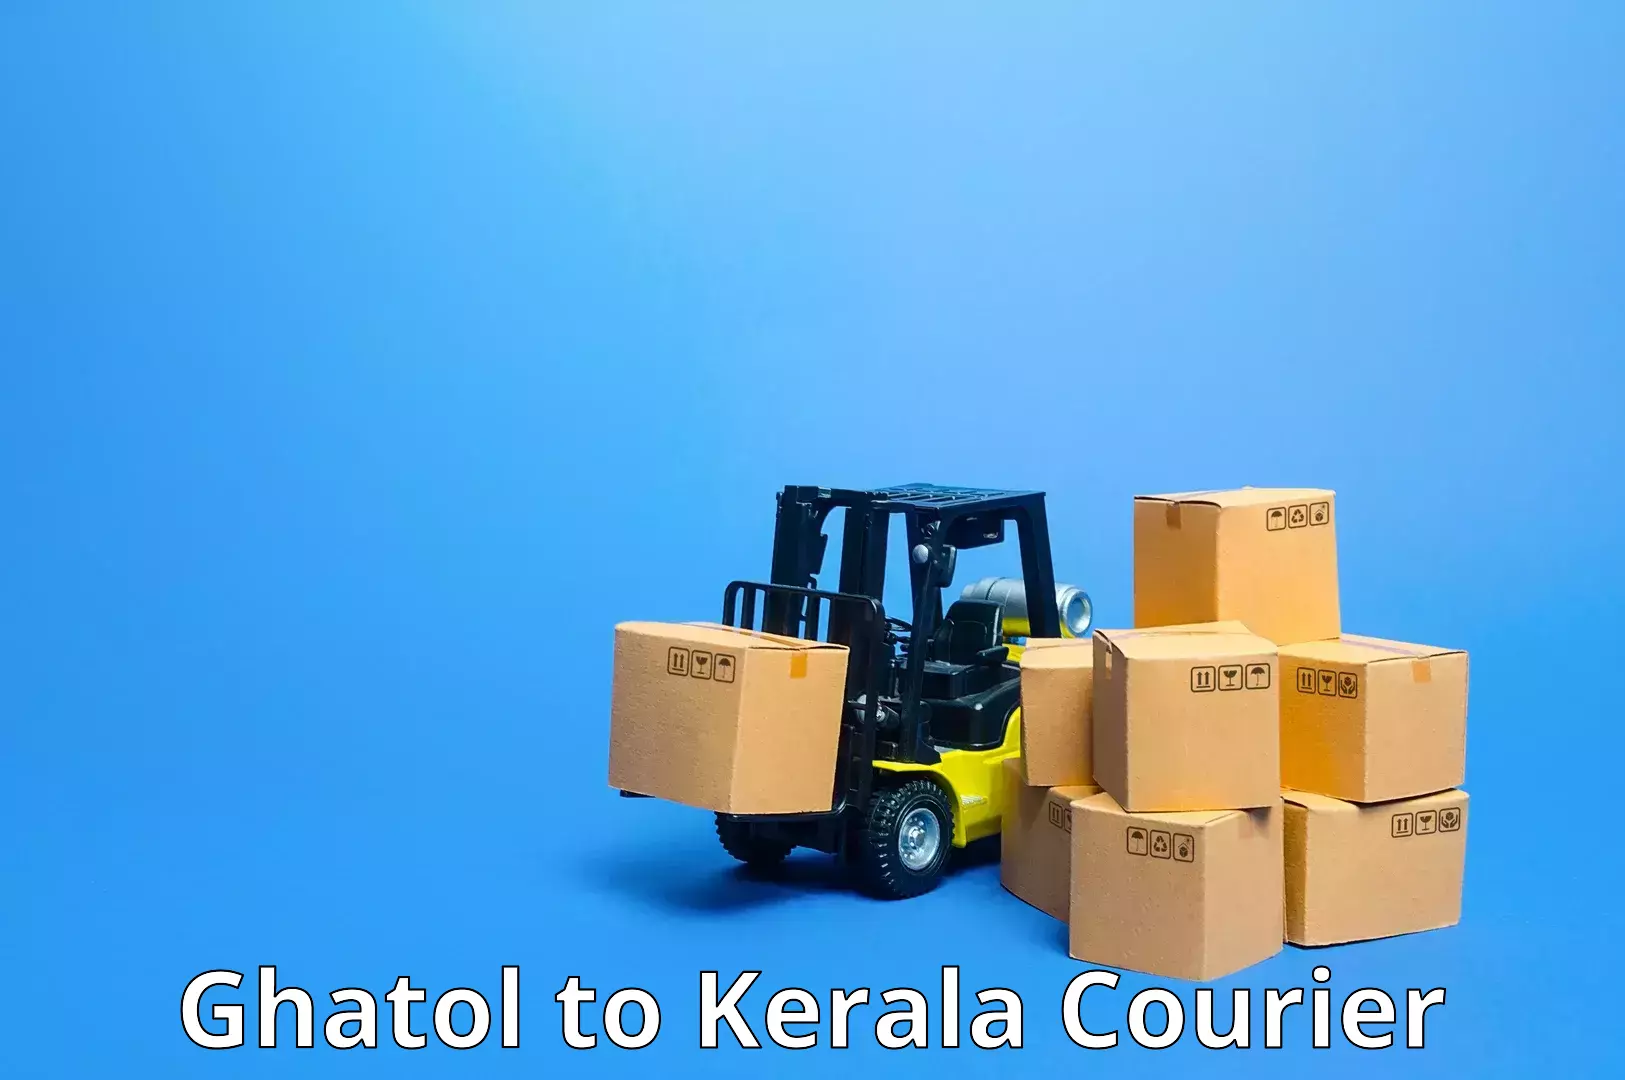 Express delivery network Ghatol to Kerala